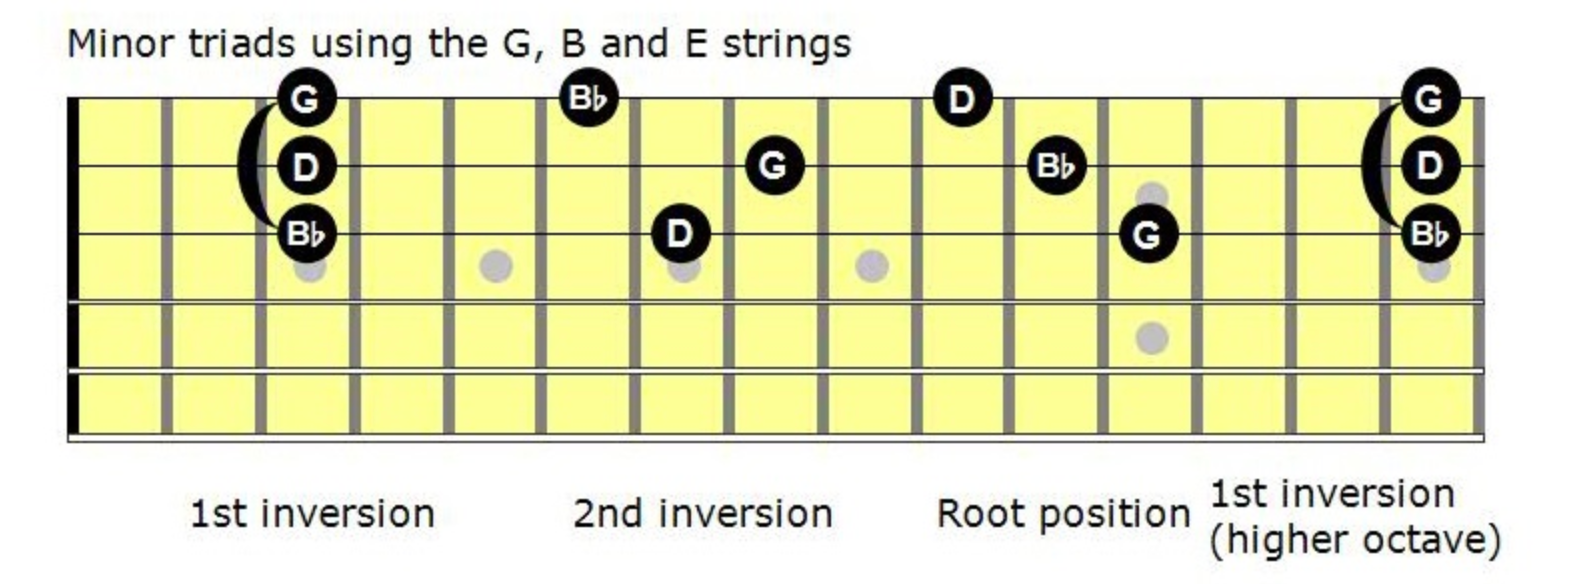 Minor Triad: all inversions on G, B, and E strings